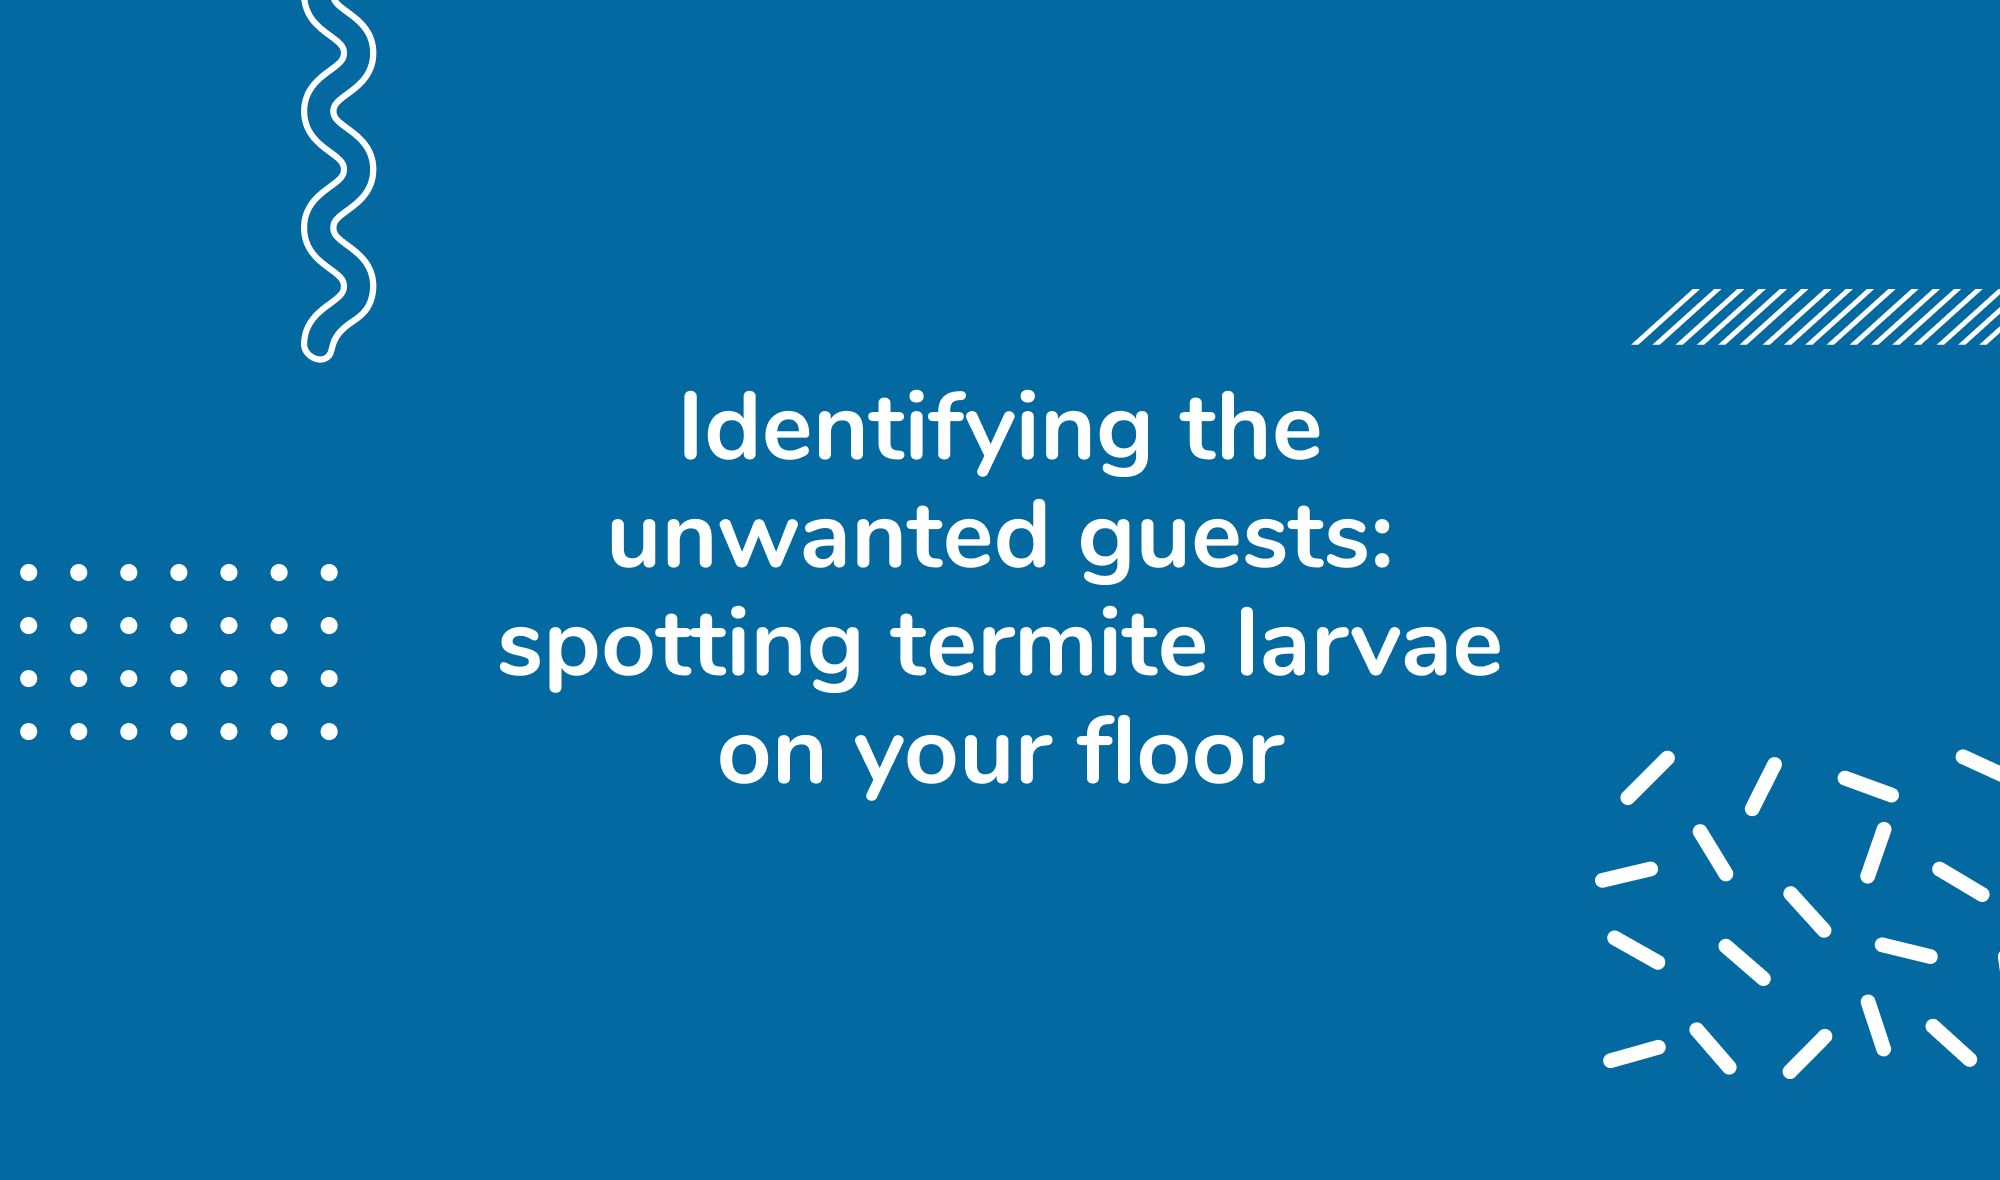 Identifying the unwanted guests: spotting termite larvae on your floor